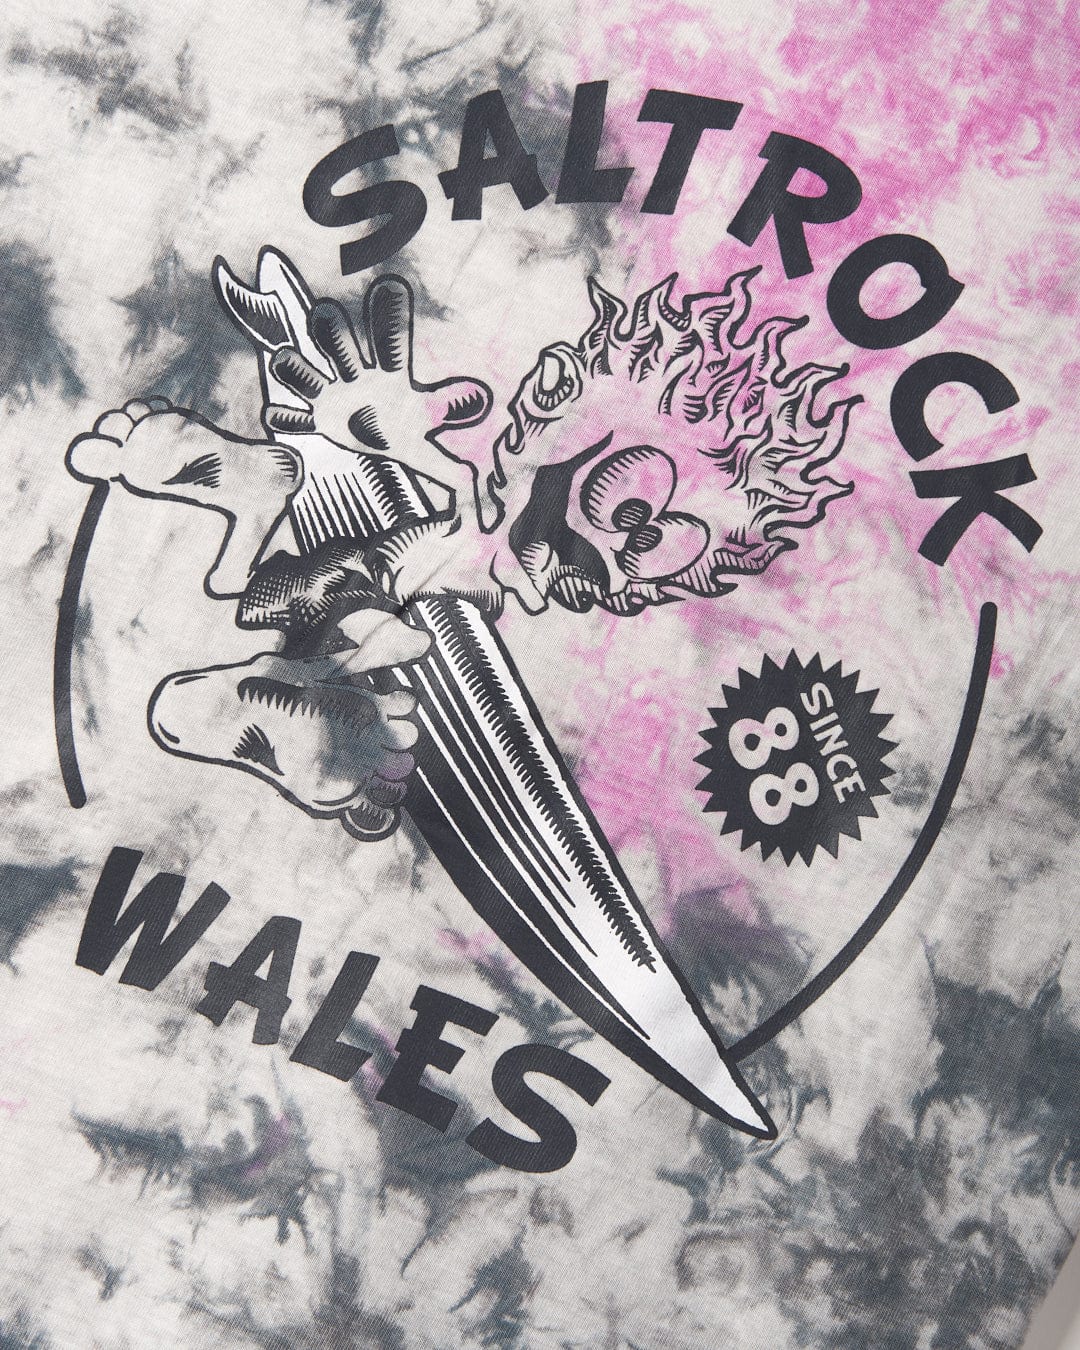 Graphic print on a Wave Rider Wales 100% Cotton tie-dye shirt featuring Saltrock branding and the text "wales" with an illustration of a dragon and a surfboard.